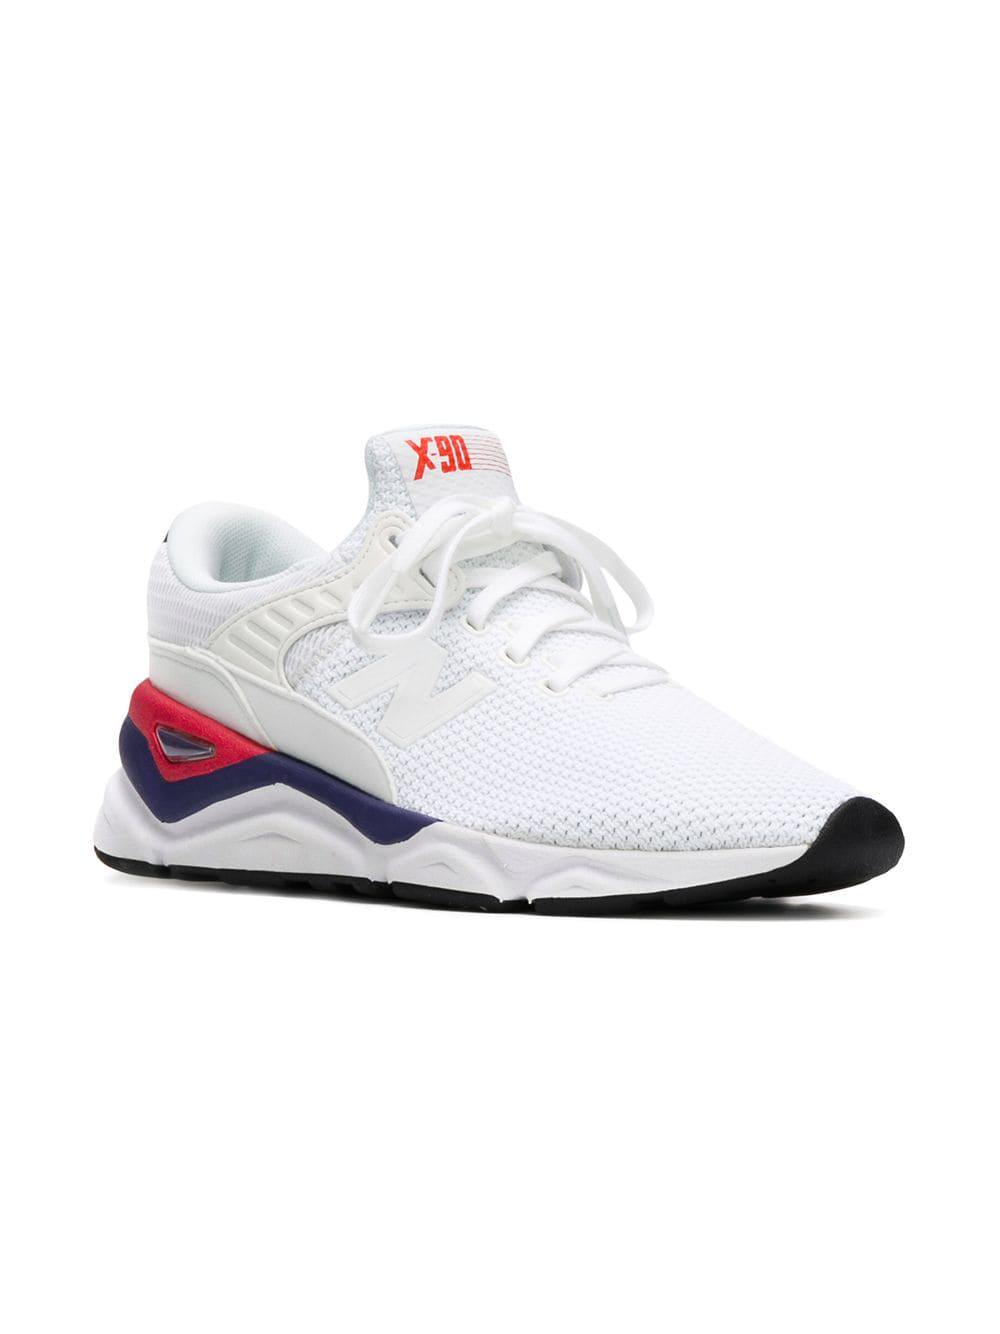 New Balance Synthetic Ws X90 Lifestyle Retro 90s Sneakers in White - Lyst